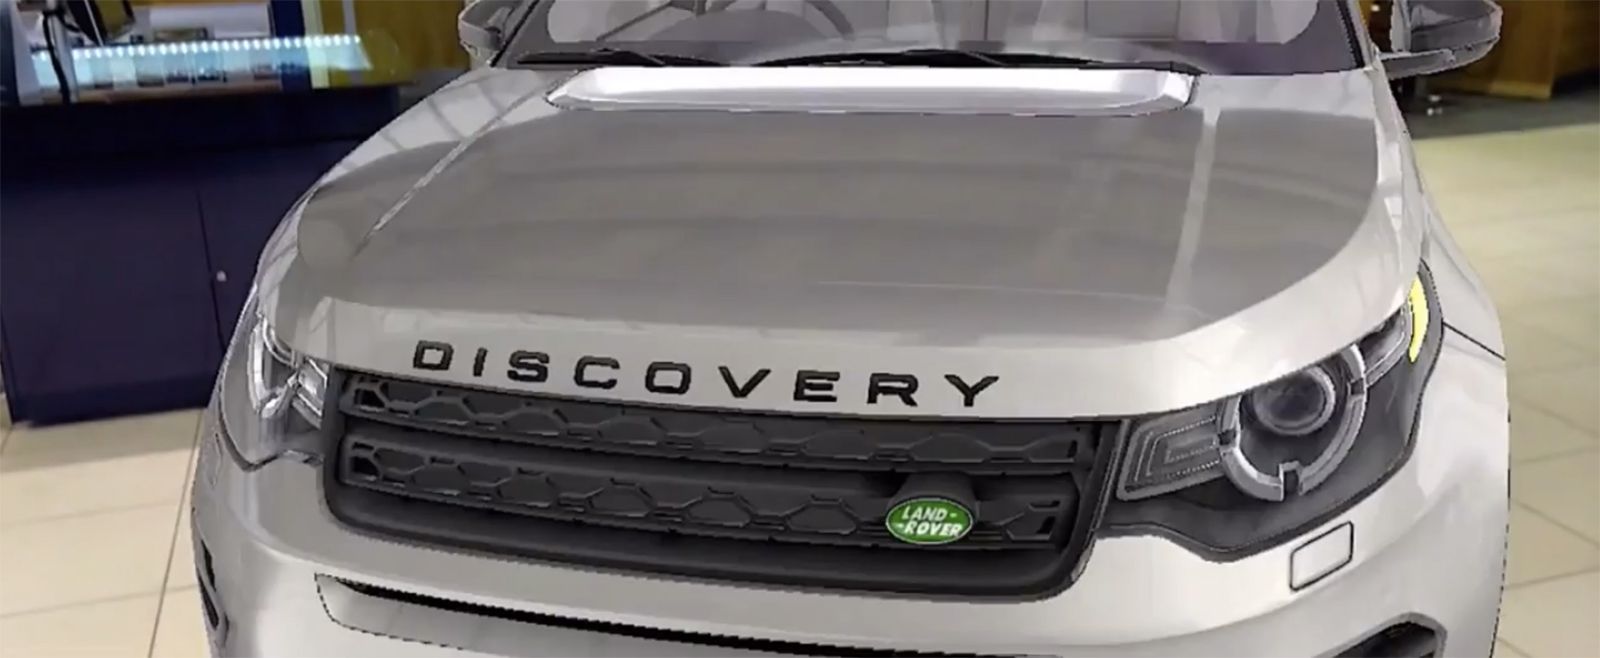 take an augmented reality tour of the 2015 land rover discovery sport before it s released image 1